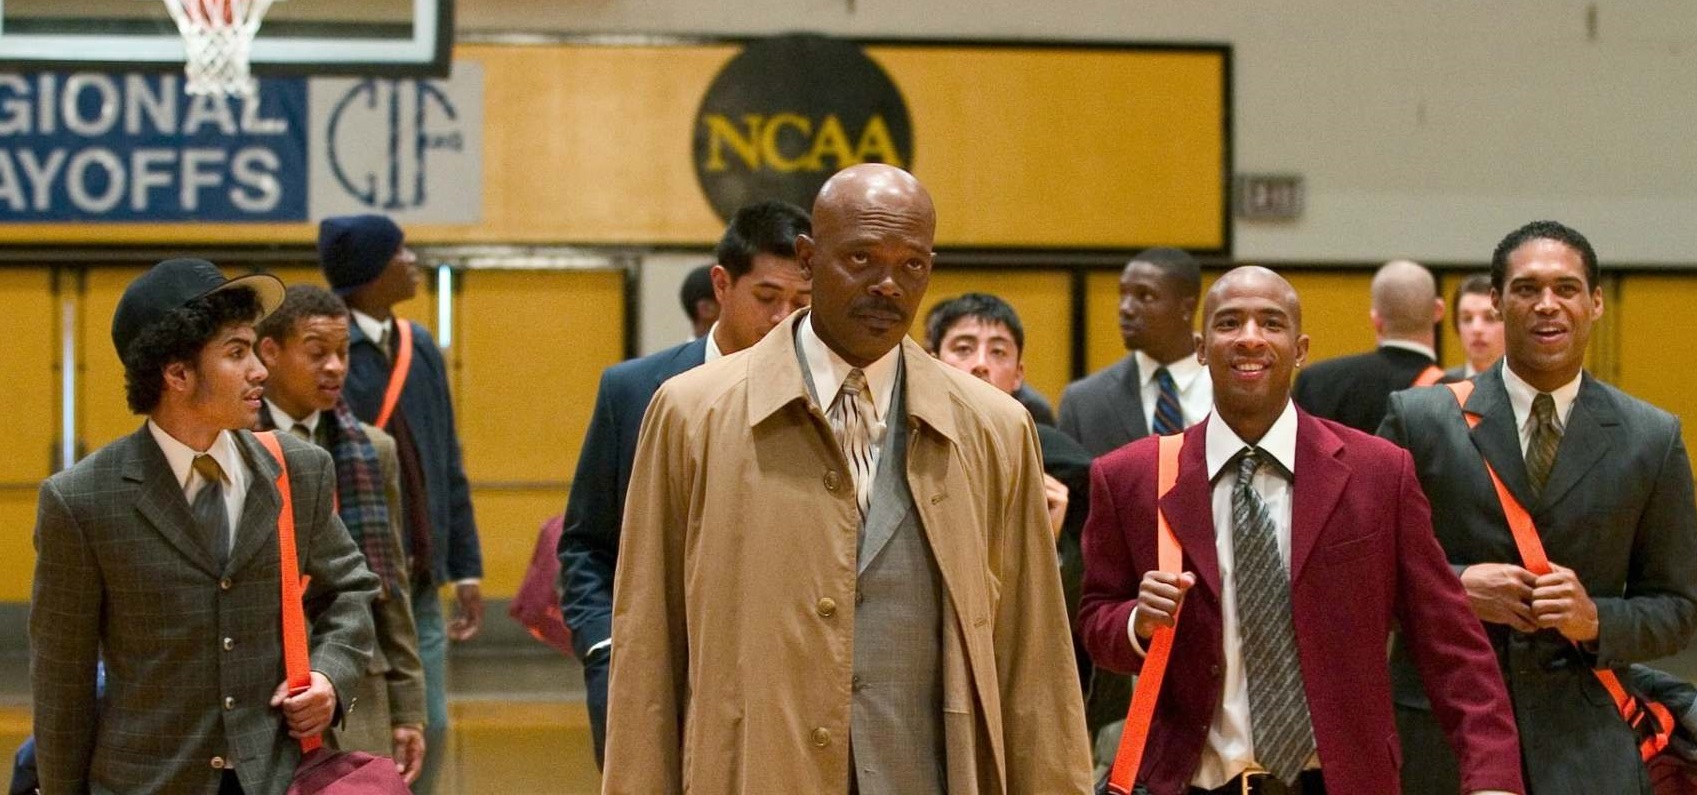 The True Story Behind the Real Coach Carter - FanBuzz